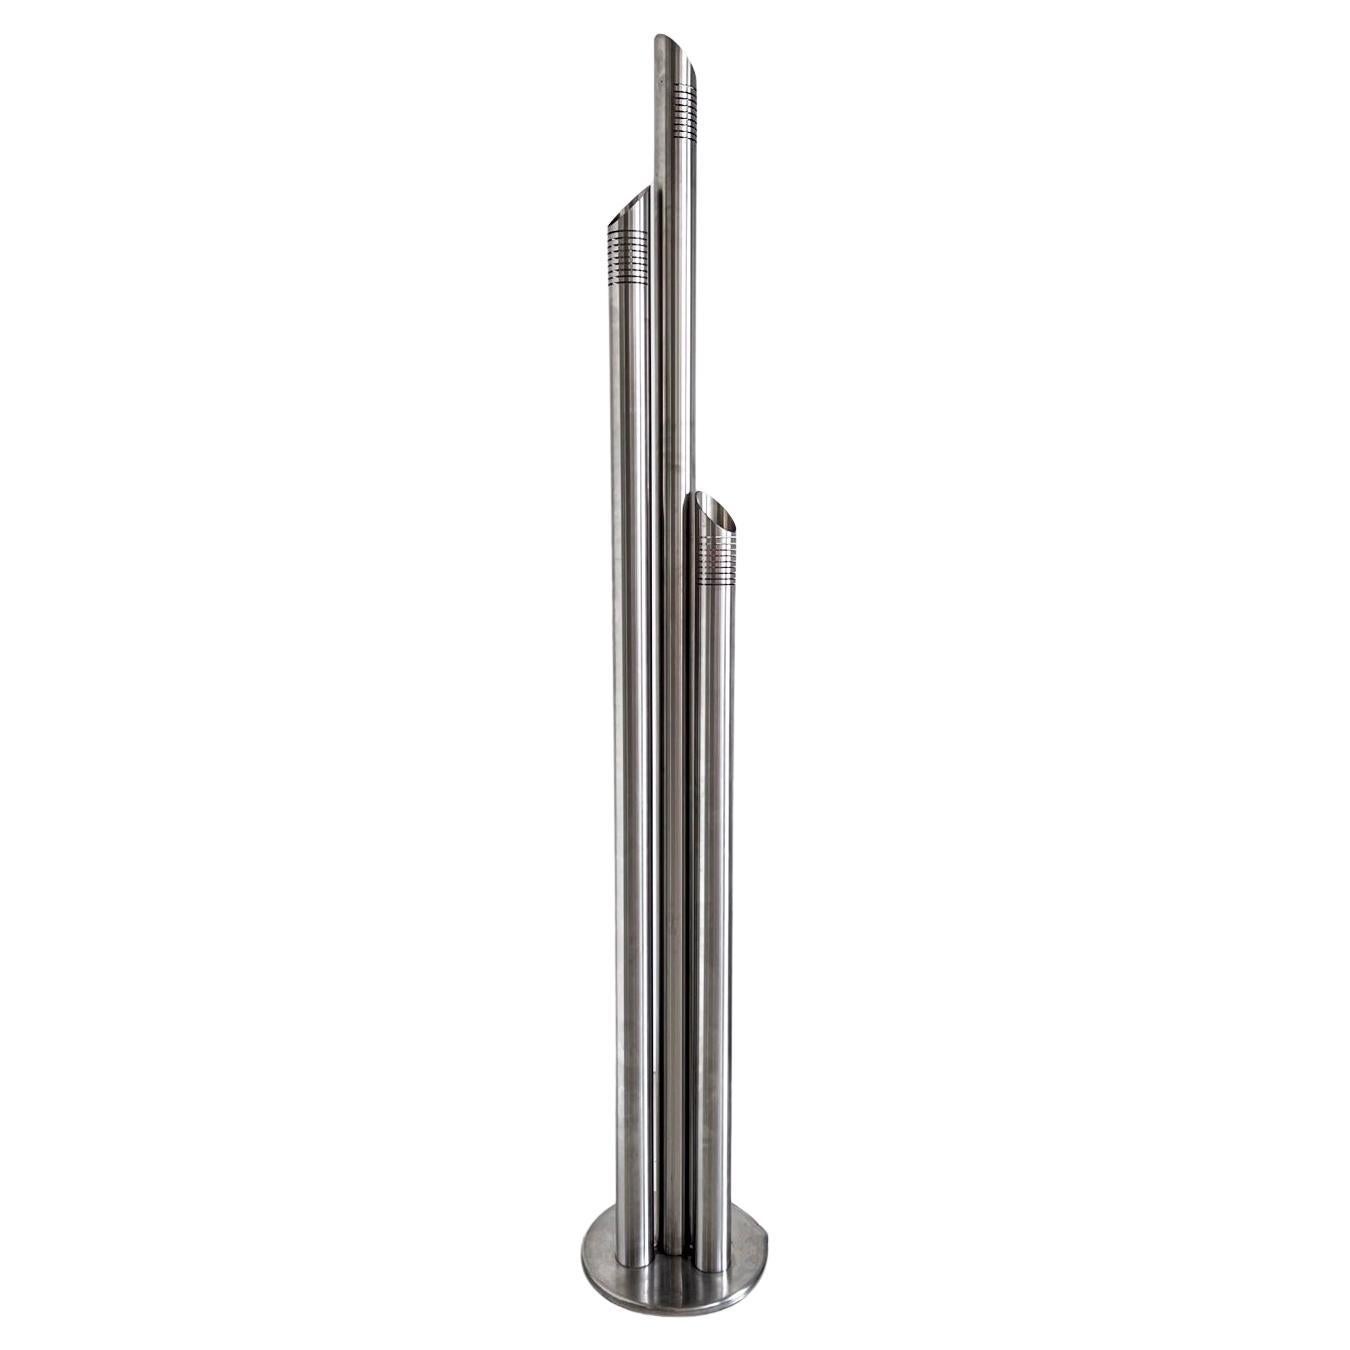 Stainless Steel Floor Lamp by Fontana for Reggiani, Italian Collectible Design For Sale